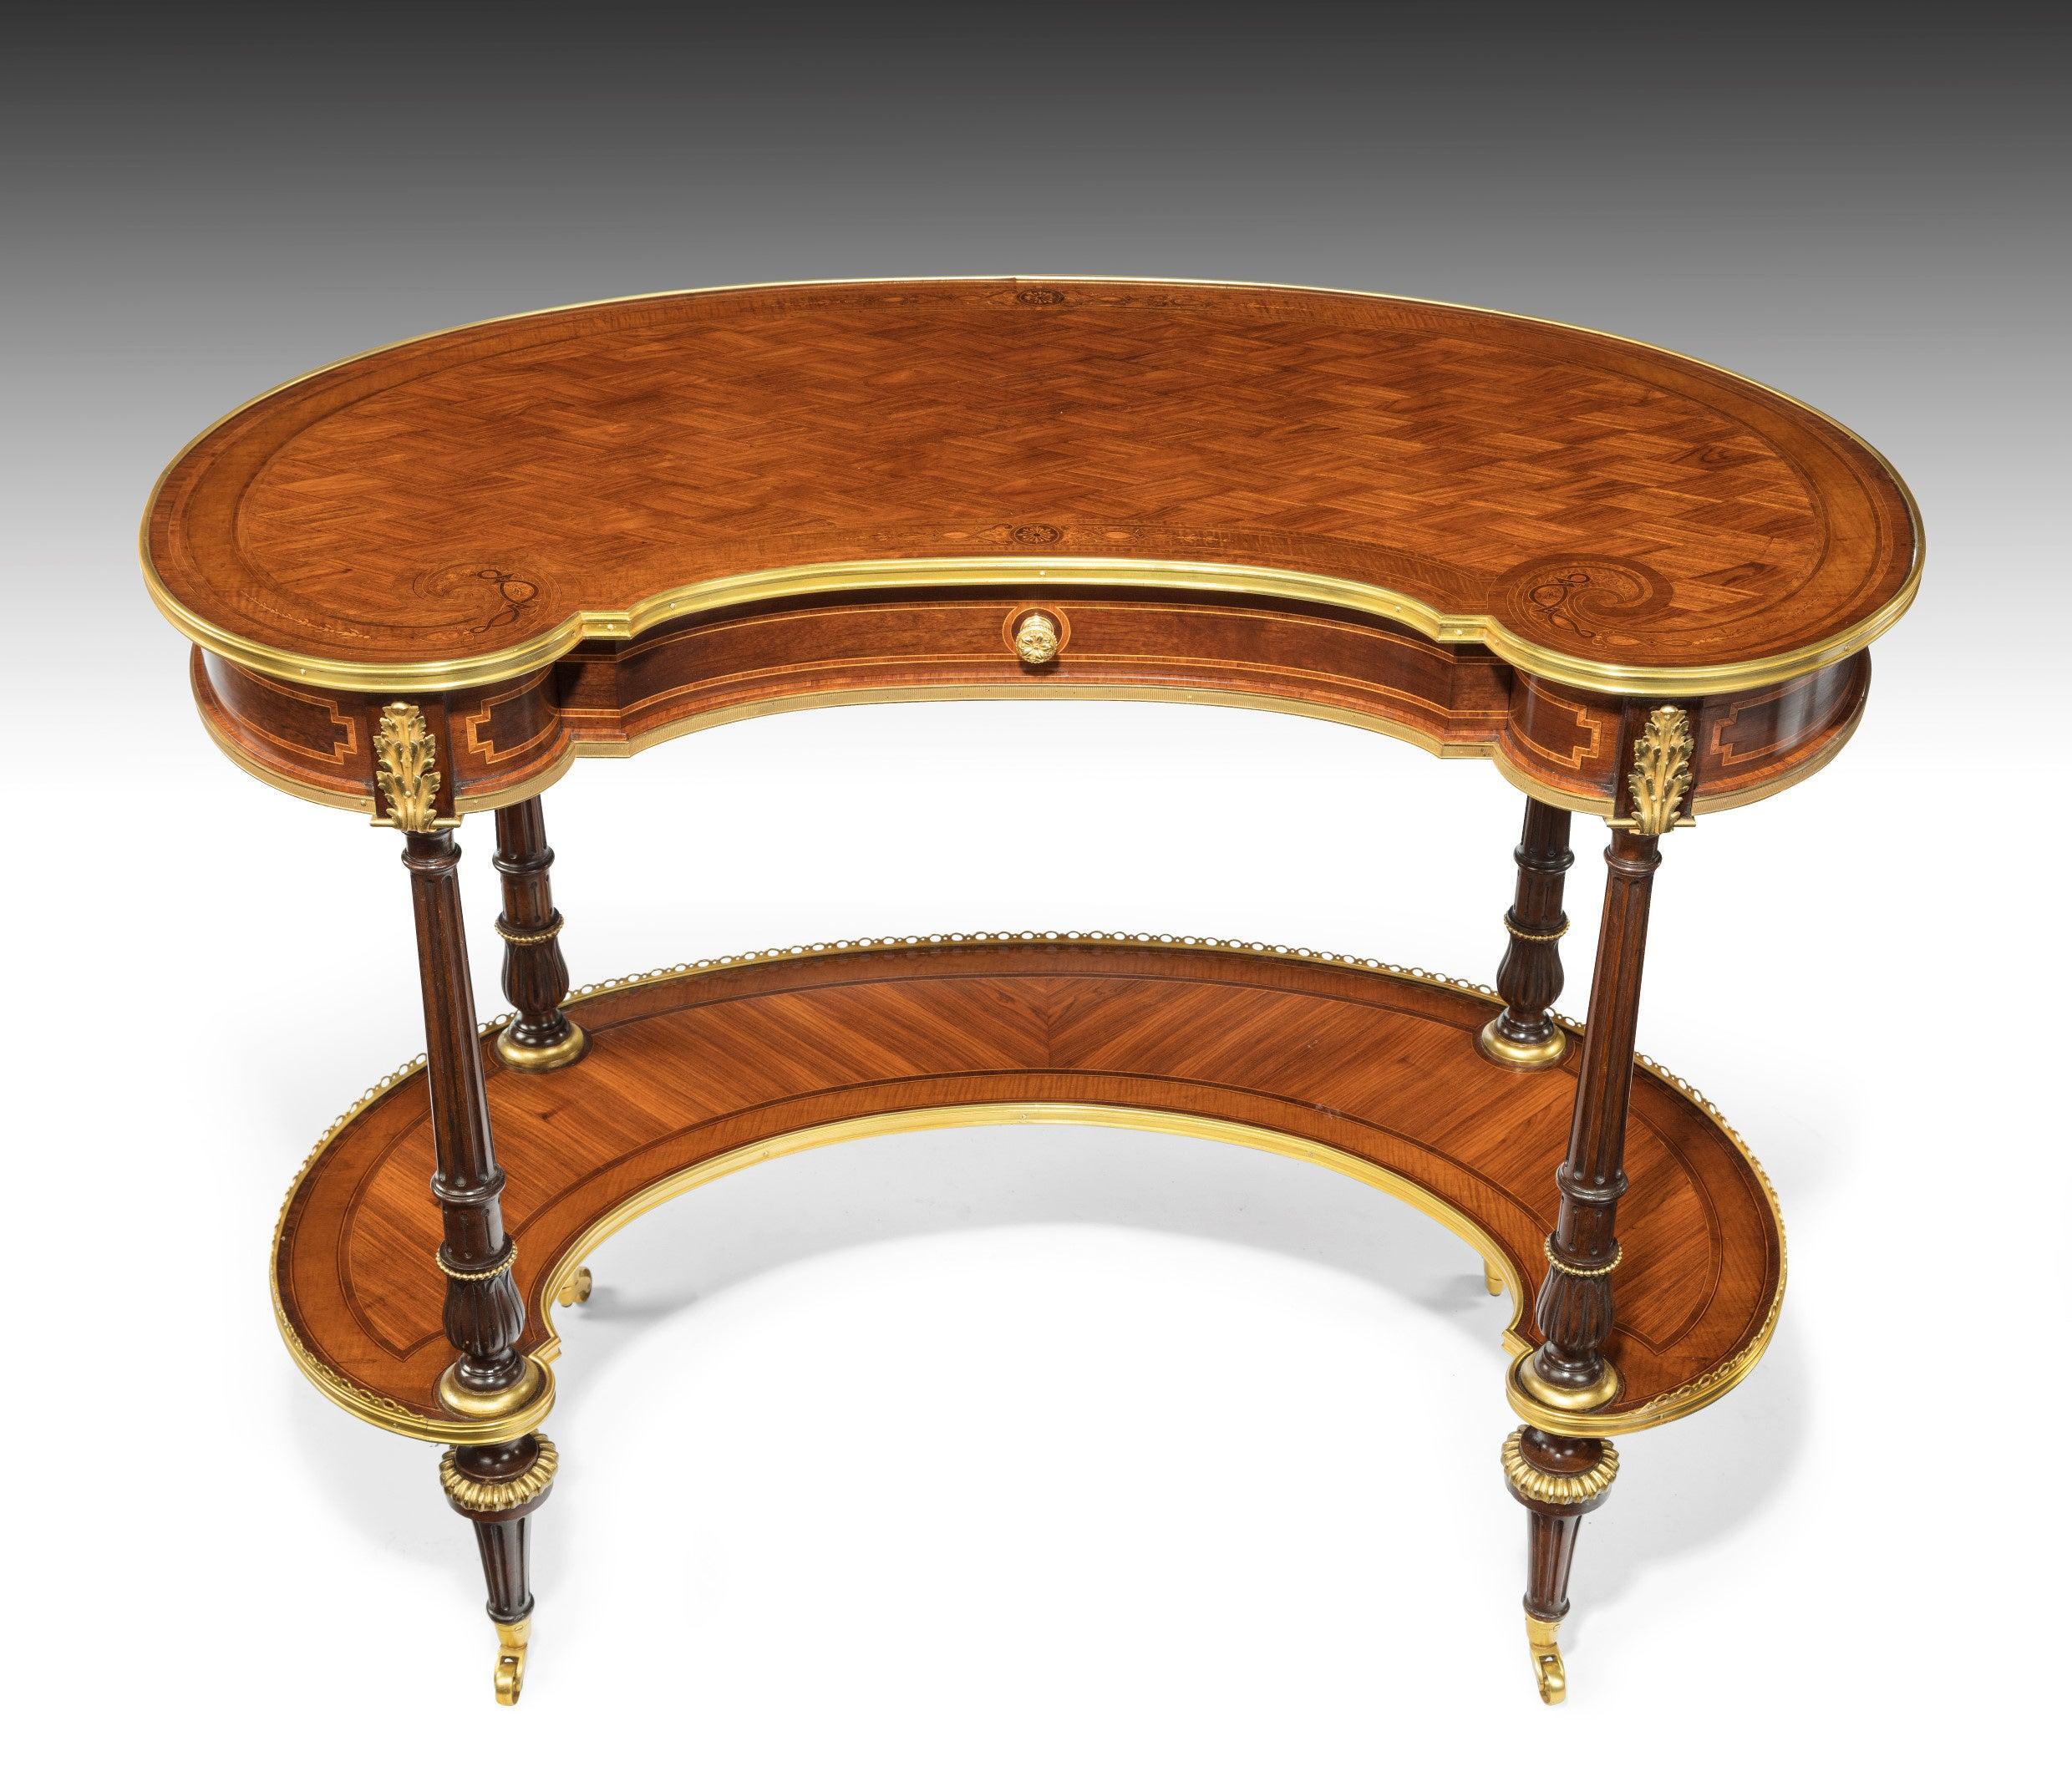 19th Century Exquisite Parquetry Gillows Kidney Shaped Writing Table